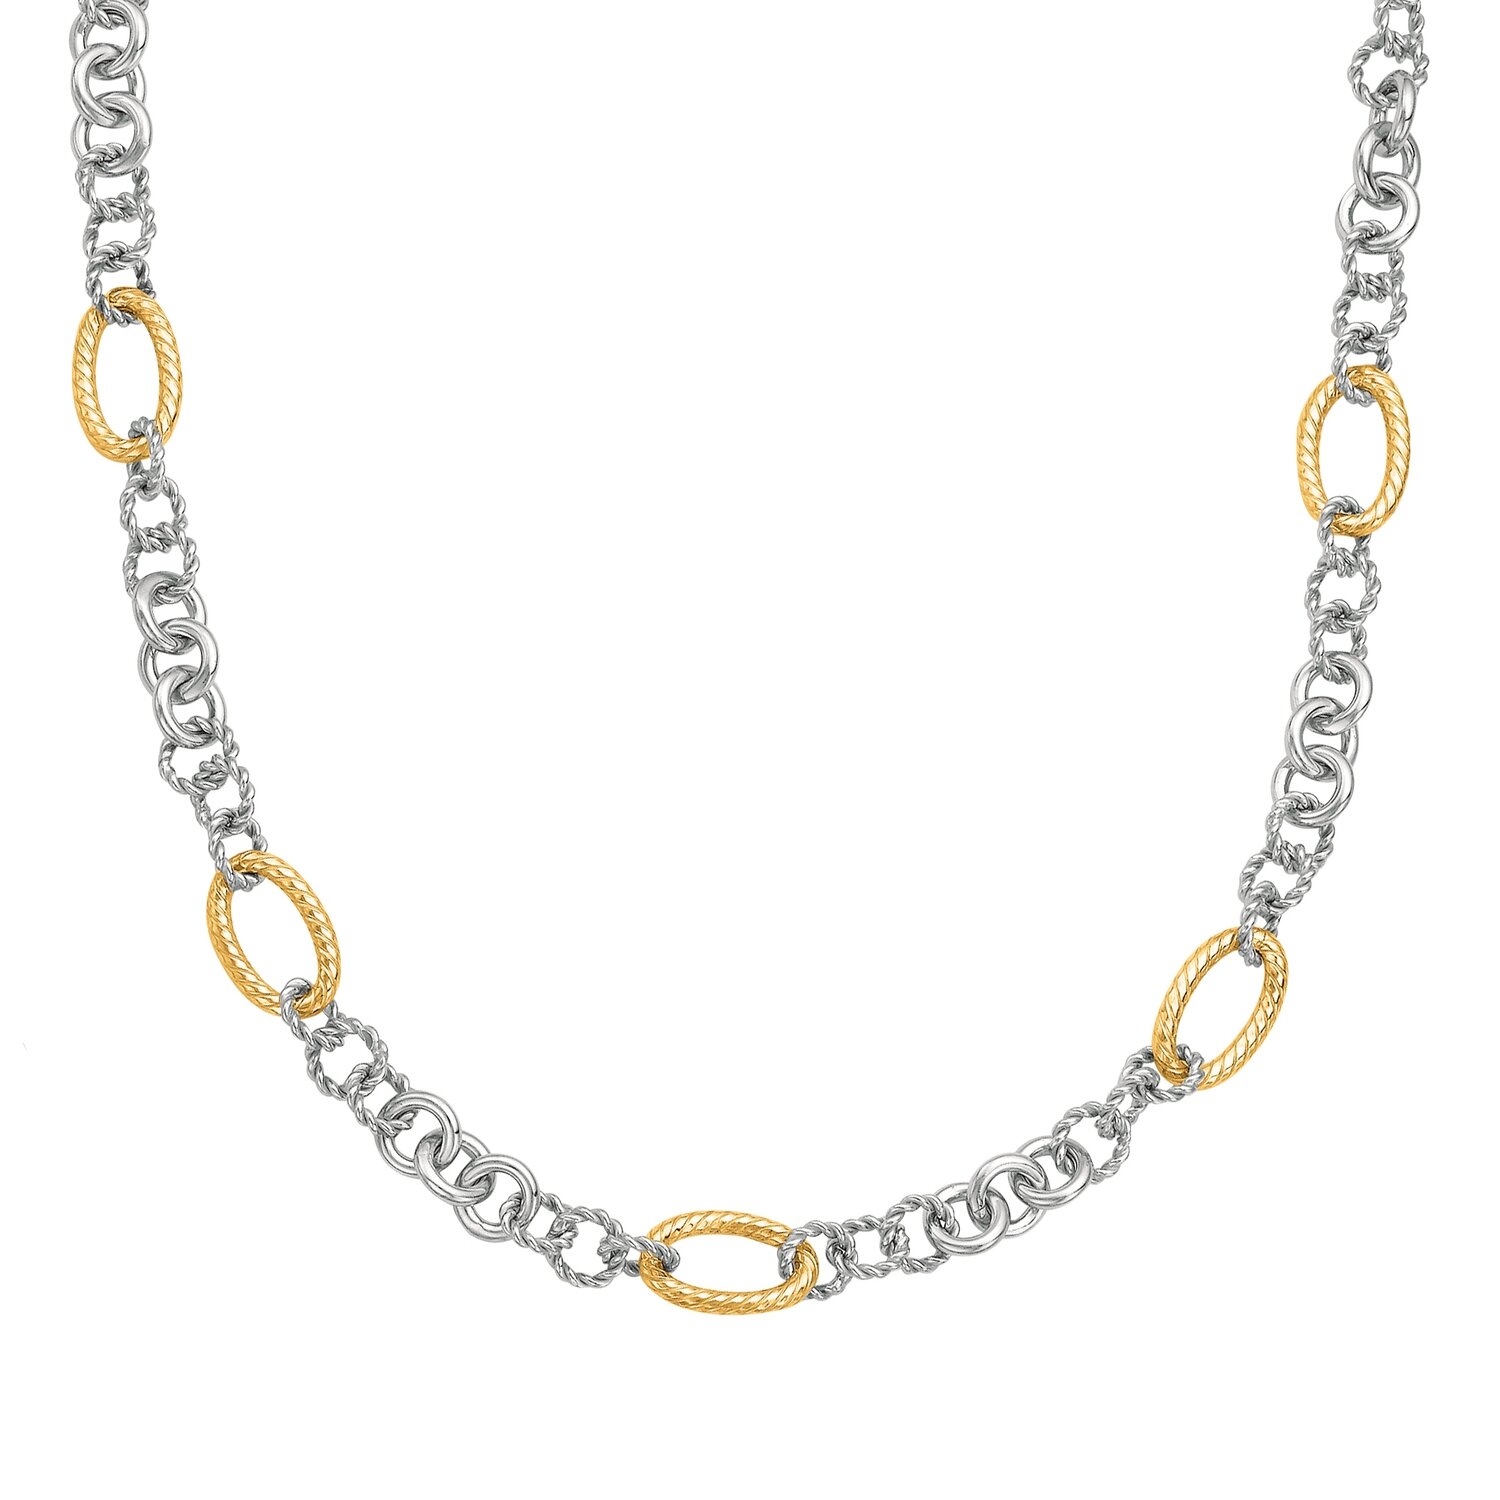 18K Yellow Gold & Italian Silver Necklace